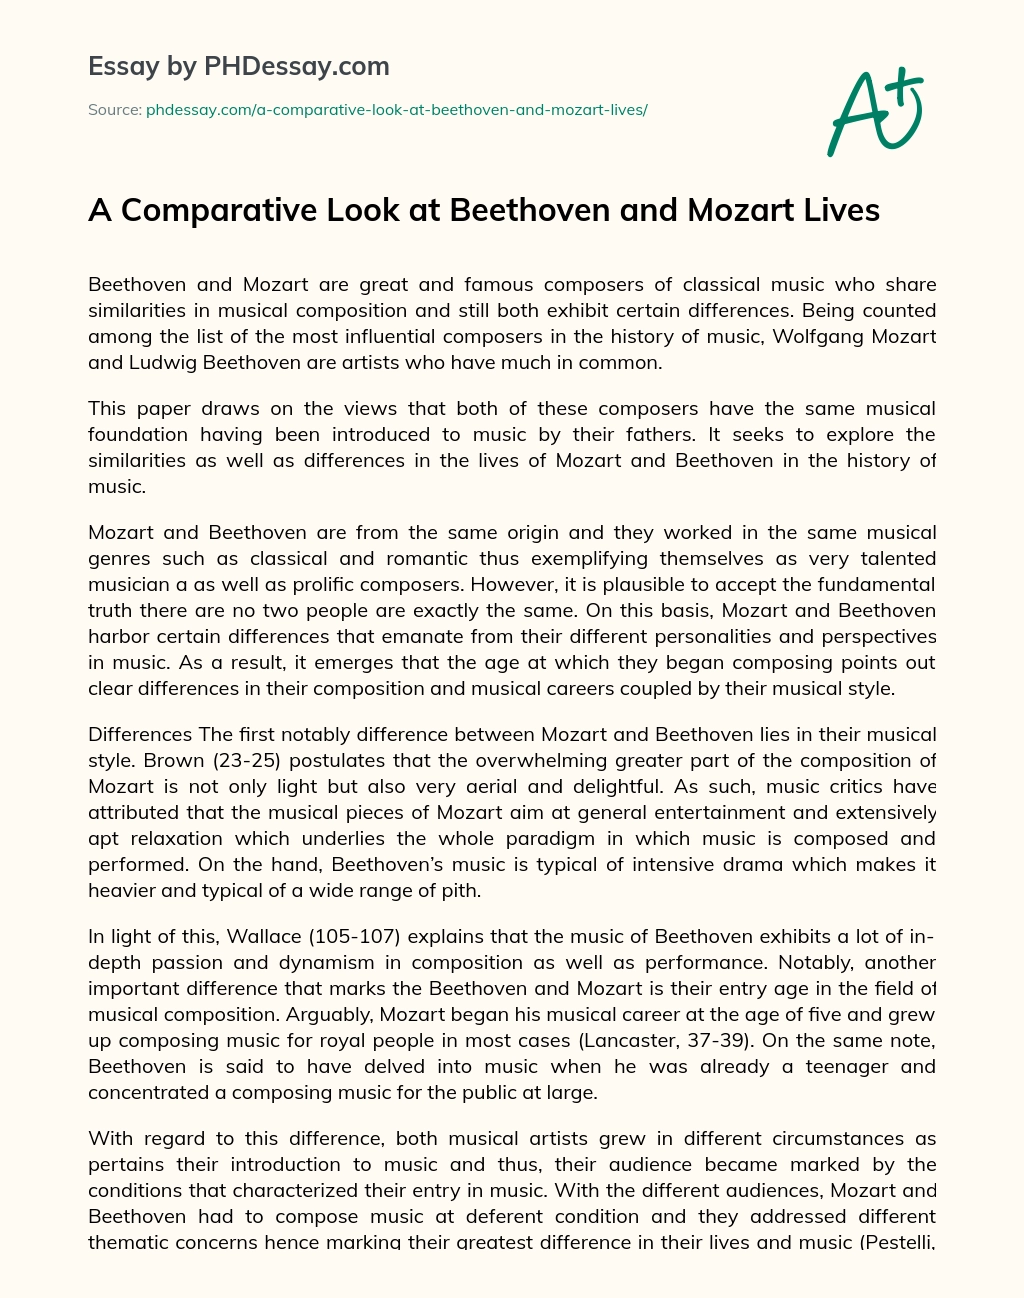 A Comparative Look at Beethoven and Mozart Lives essay